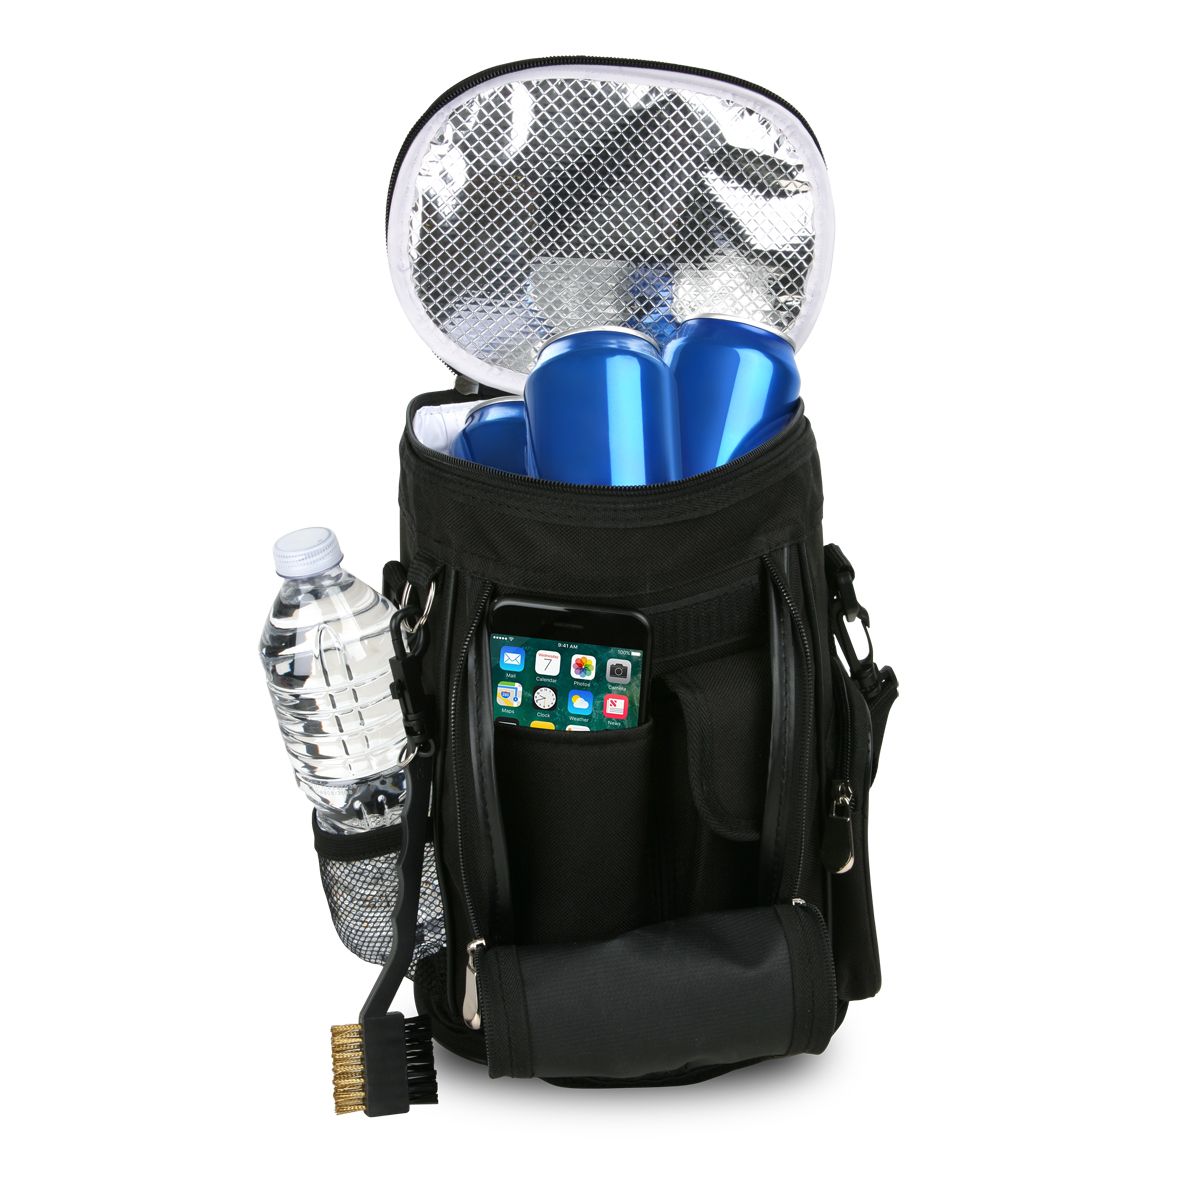 black Intech Golf Bag Cooler and Accessory Caddy with cooler lid open and 3 aluminum cans inside, water bottle in mesh pocket, golf club cleaning brush and smart phone in pocket